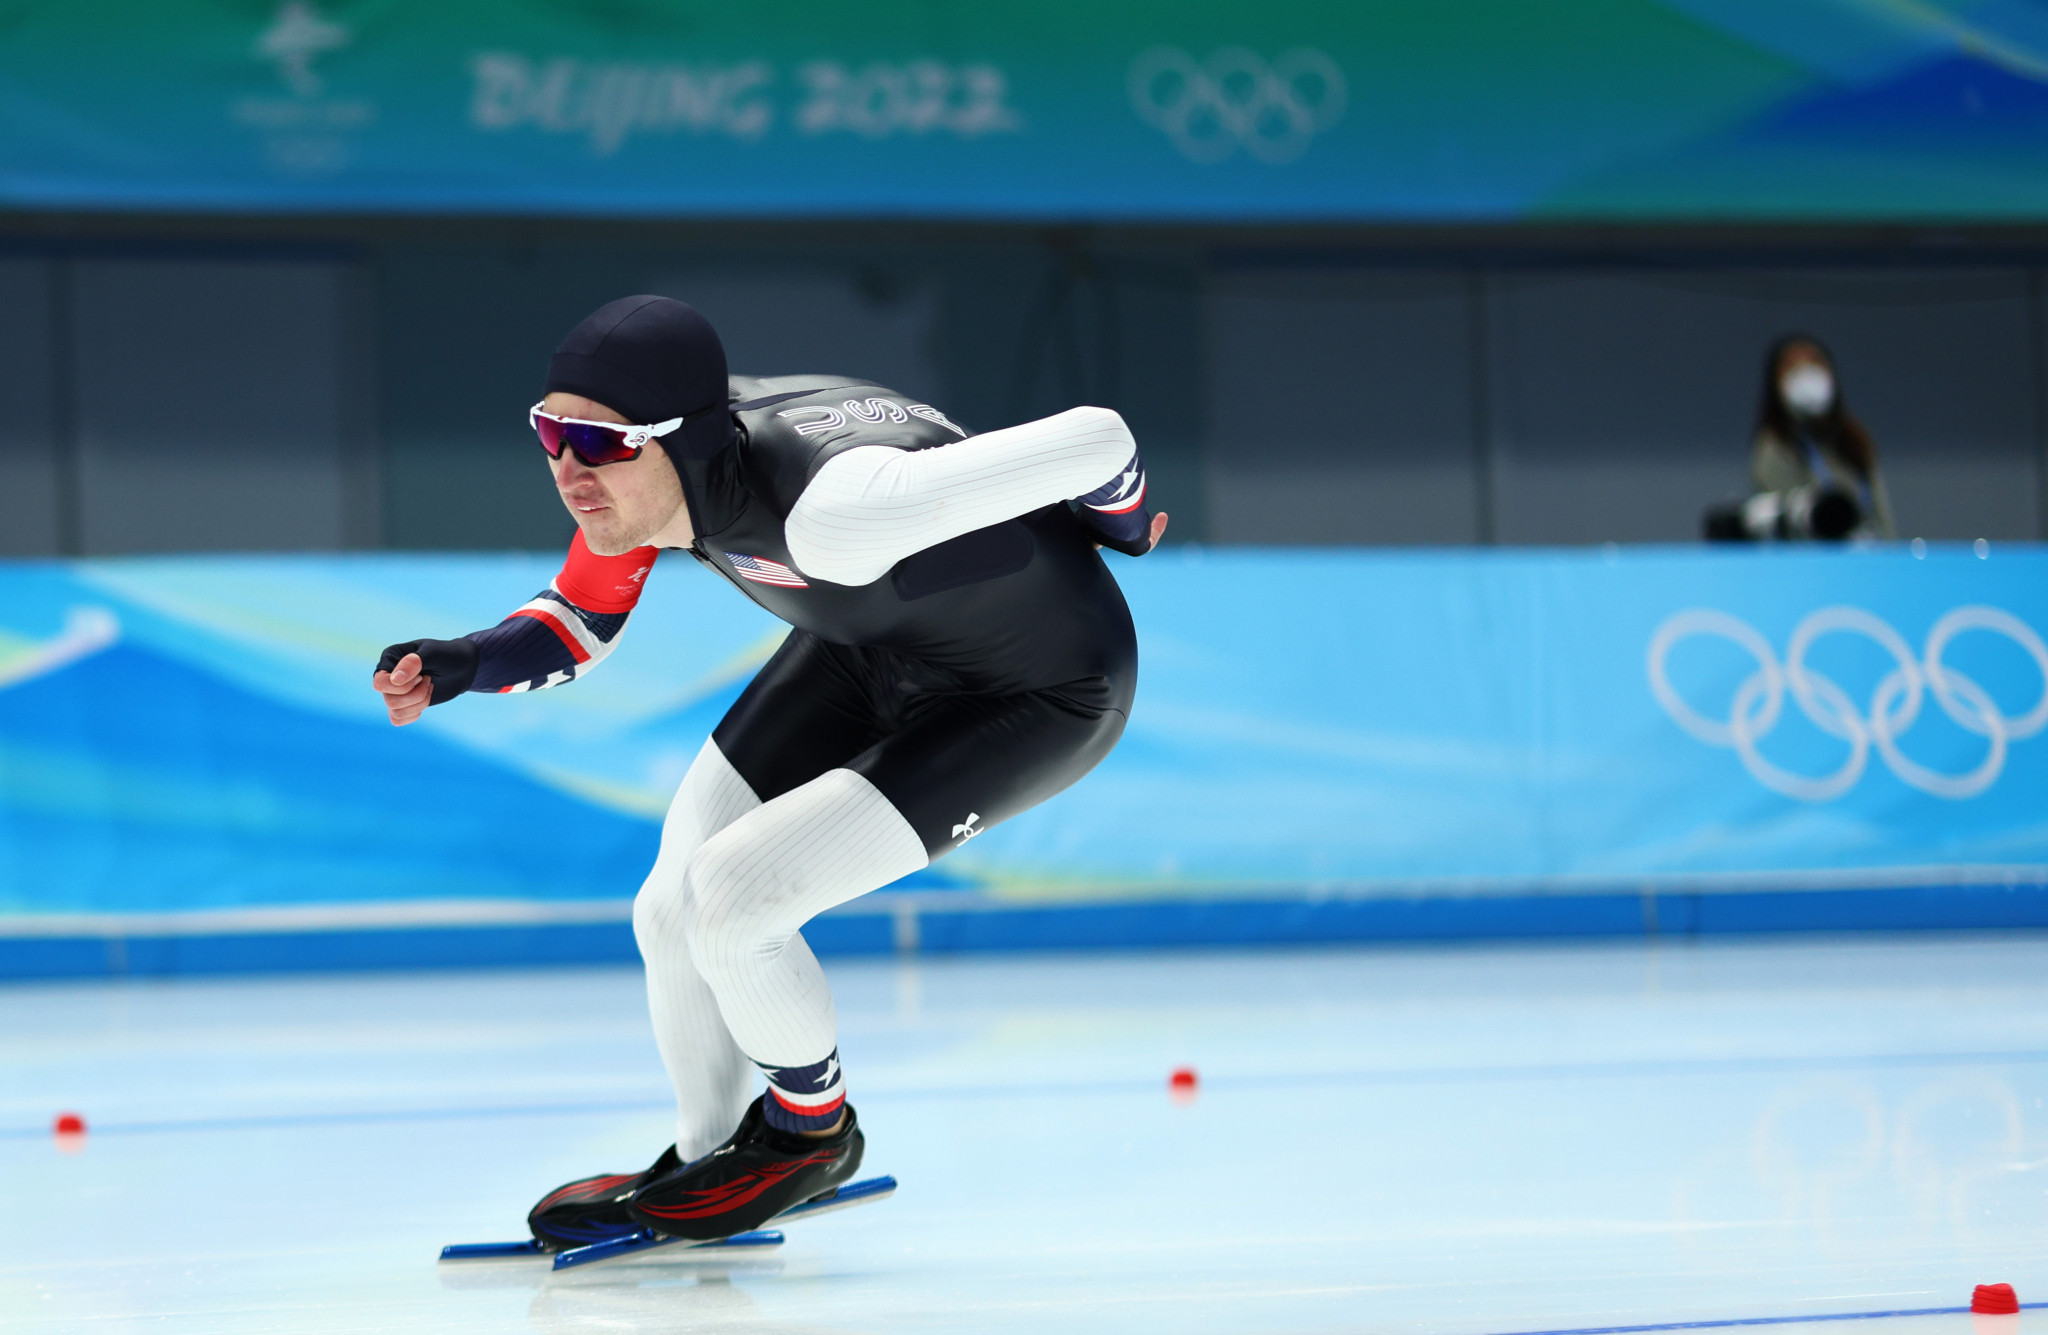 Speed skater Casey Dawson compete on borrowed skates hours after arriving in Beijing ©Getty Images